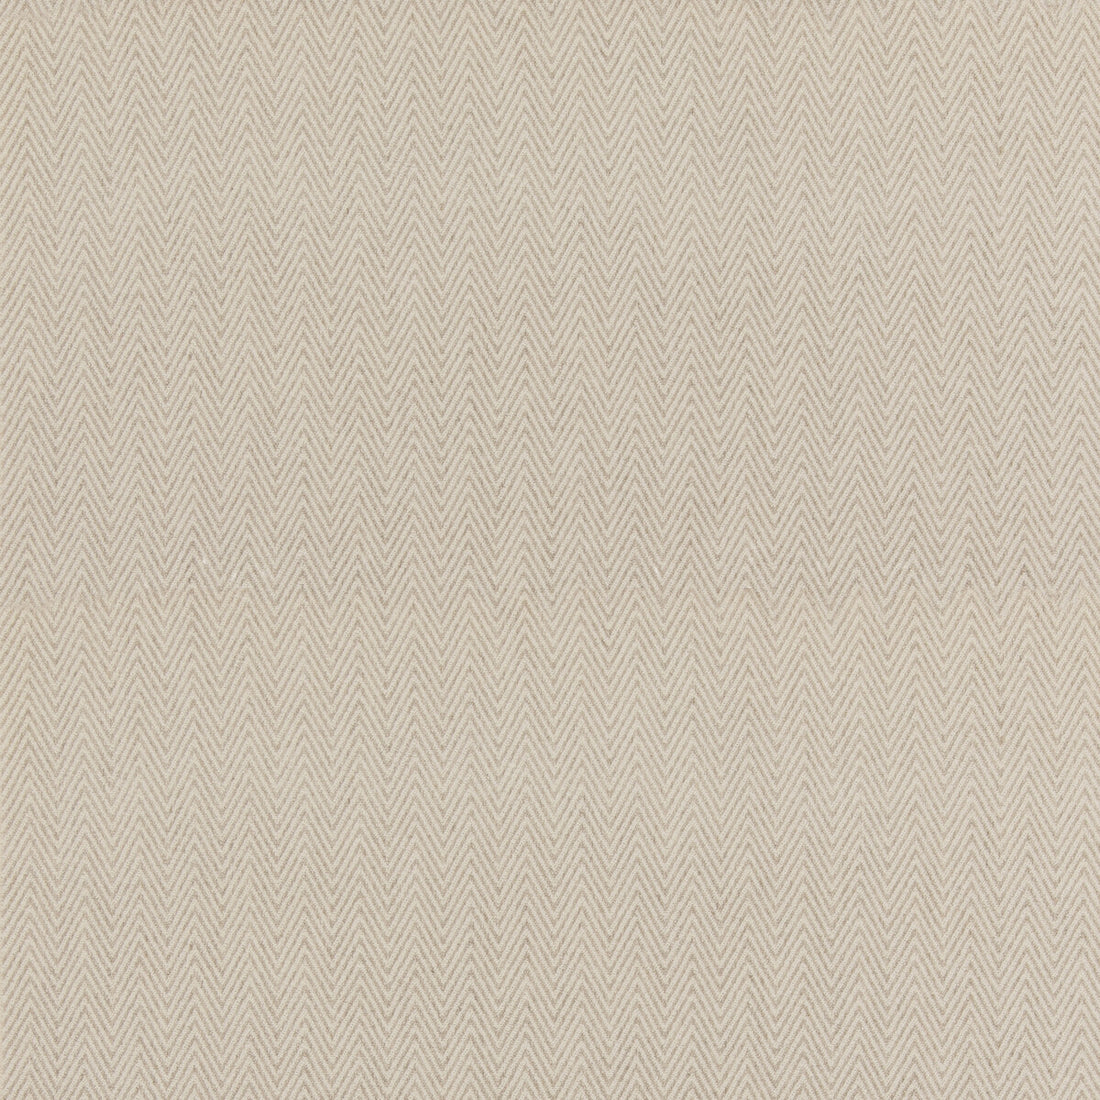 Medina fabric in parchment color - pattern ED85377.225.0 - by Threads in the Quintessential Textures collection